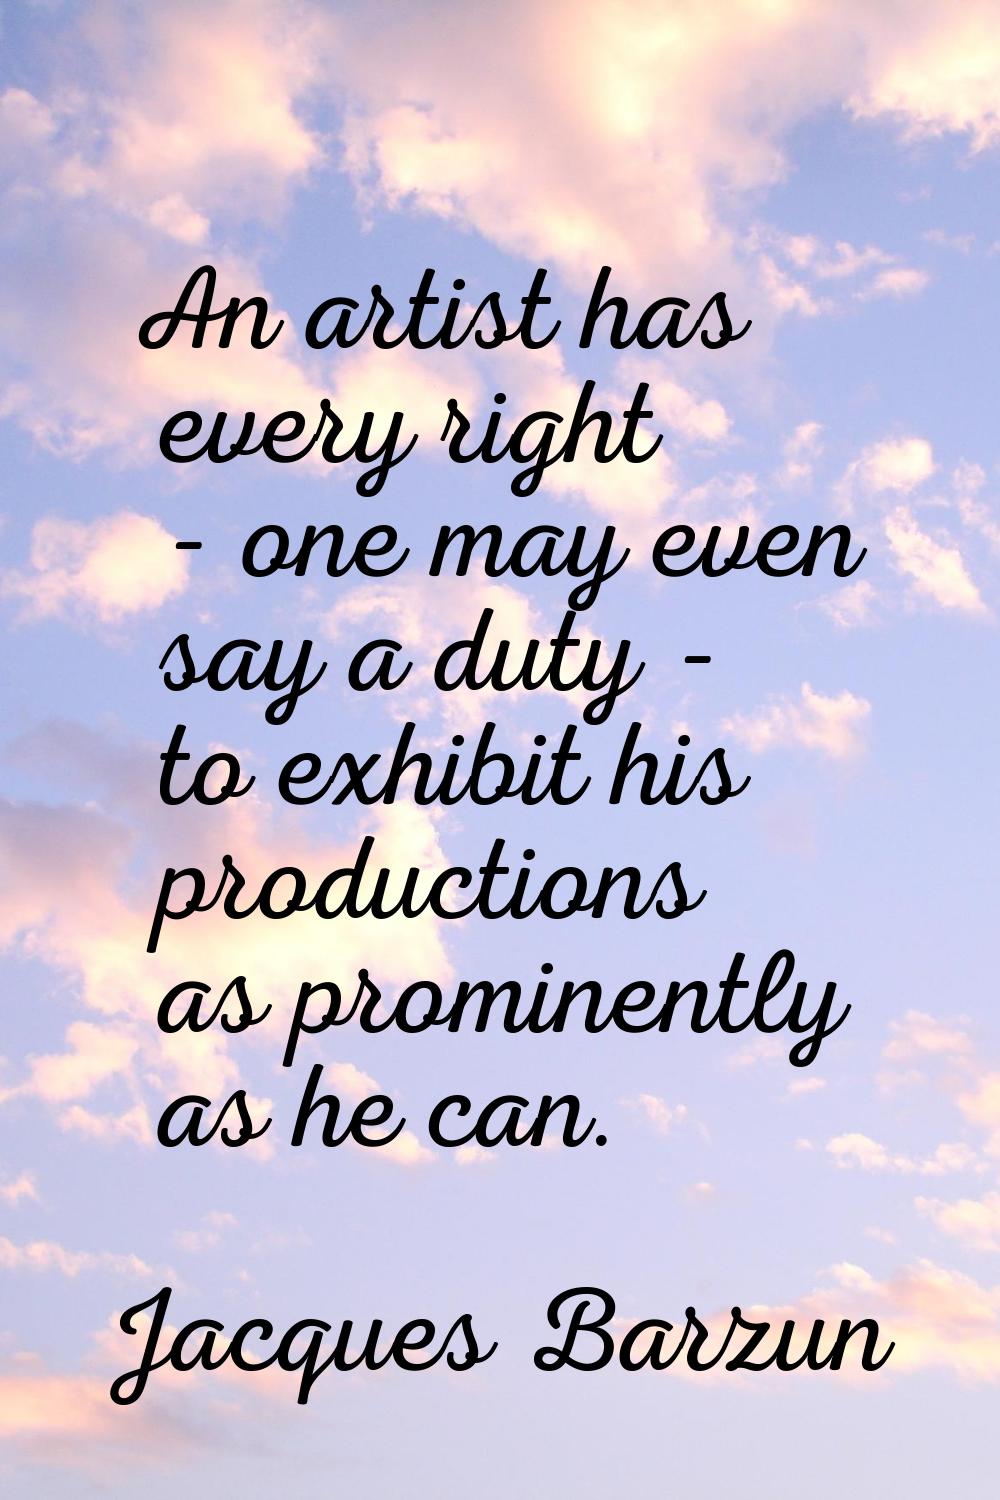 An artist has every right - one may even say a duty - to exhibit his productions as prominently as 